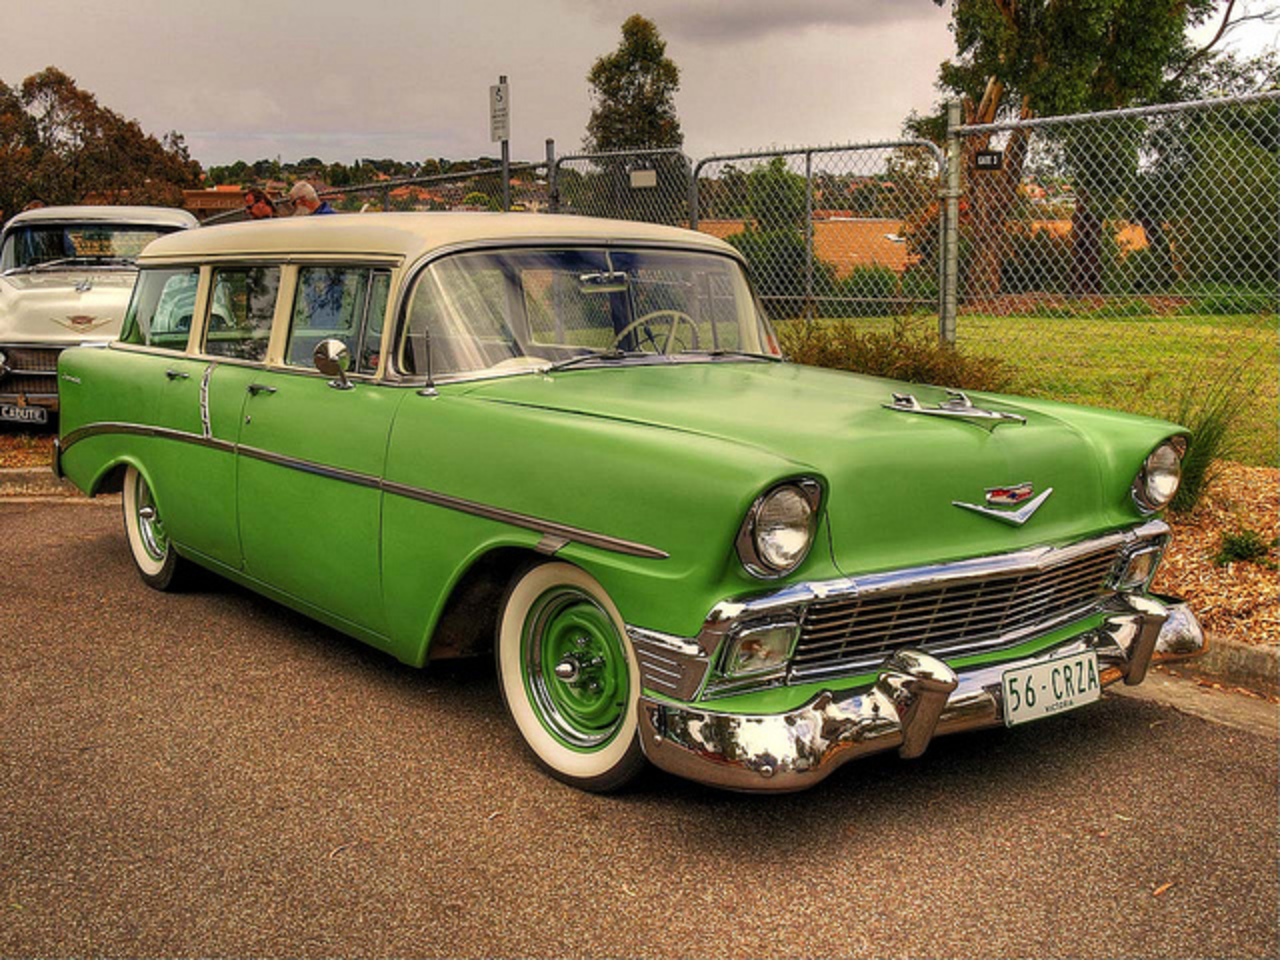 1956 Chevy 210 Beauville Wagon | Flickr - Photo Sharing!